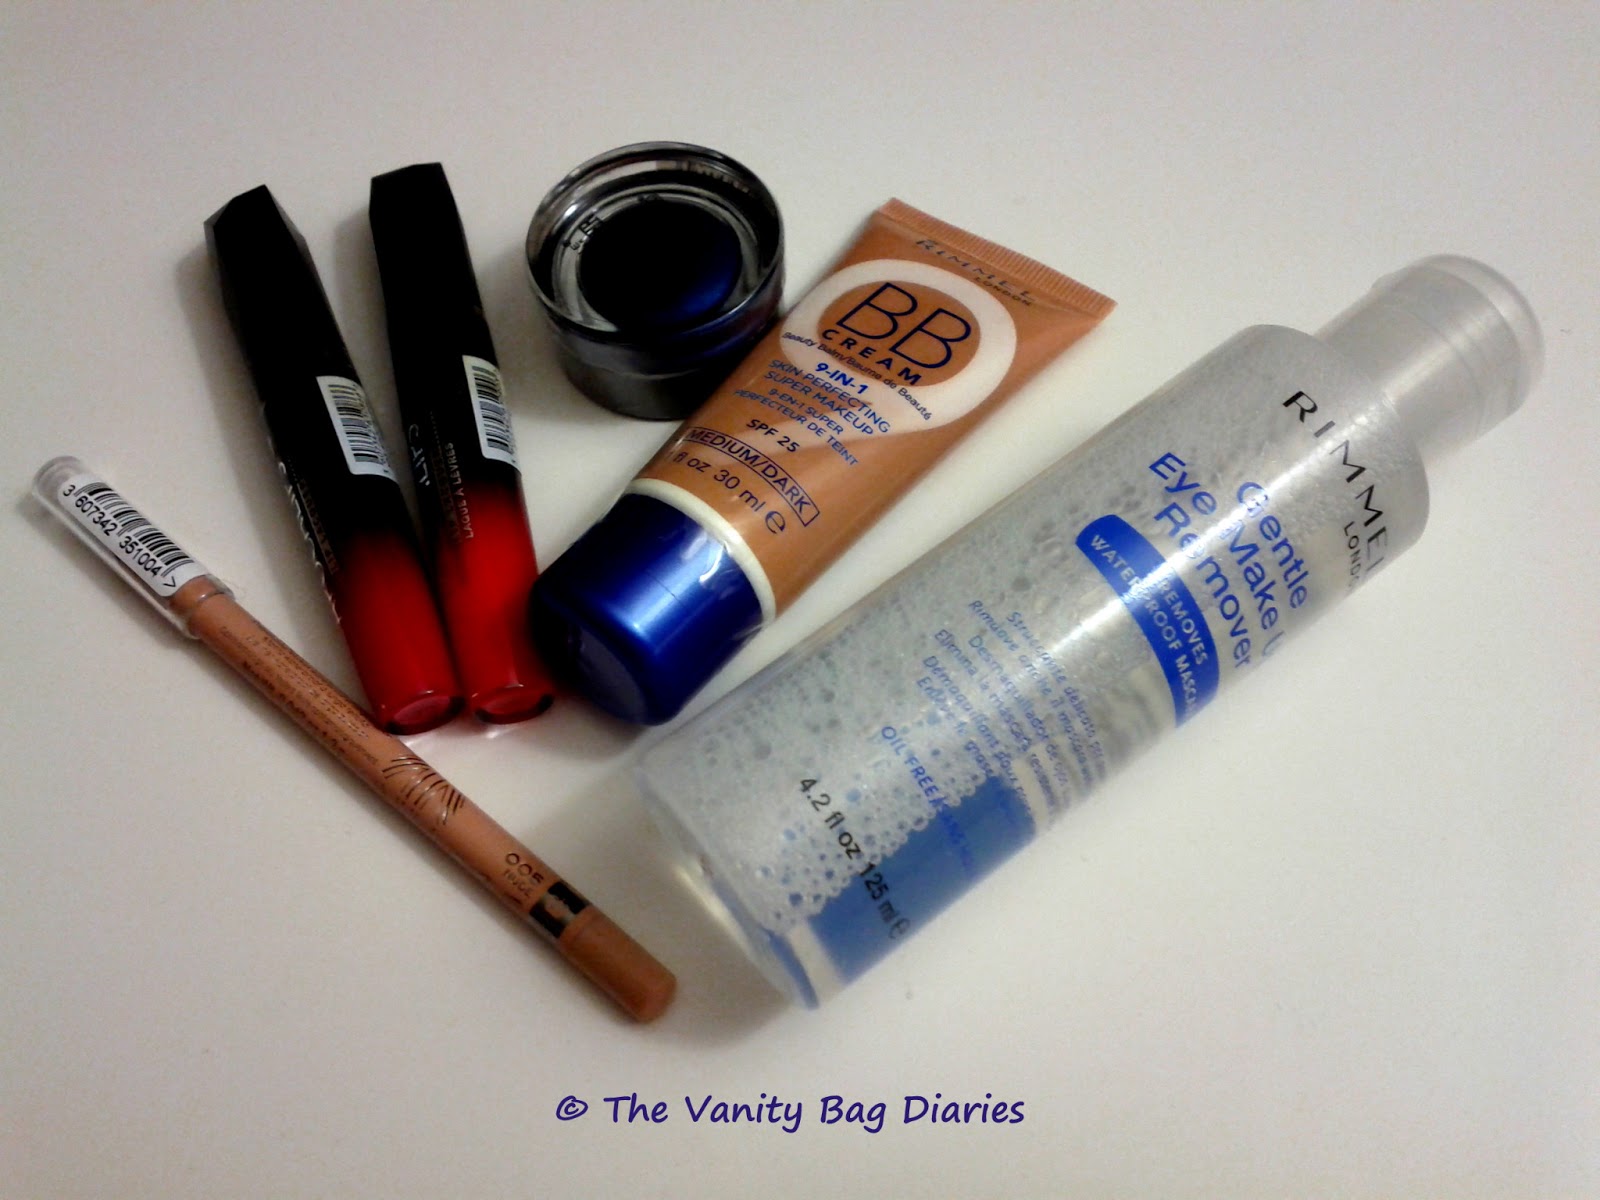 The Vanity Bag Diaries ...: A Haul A Day - Makeup, Nails ...